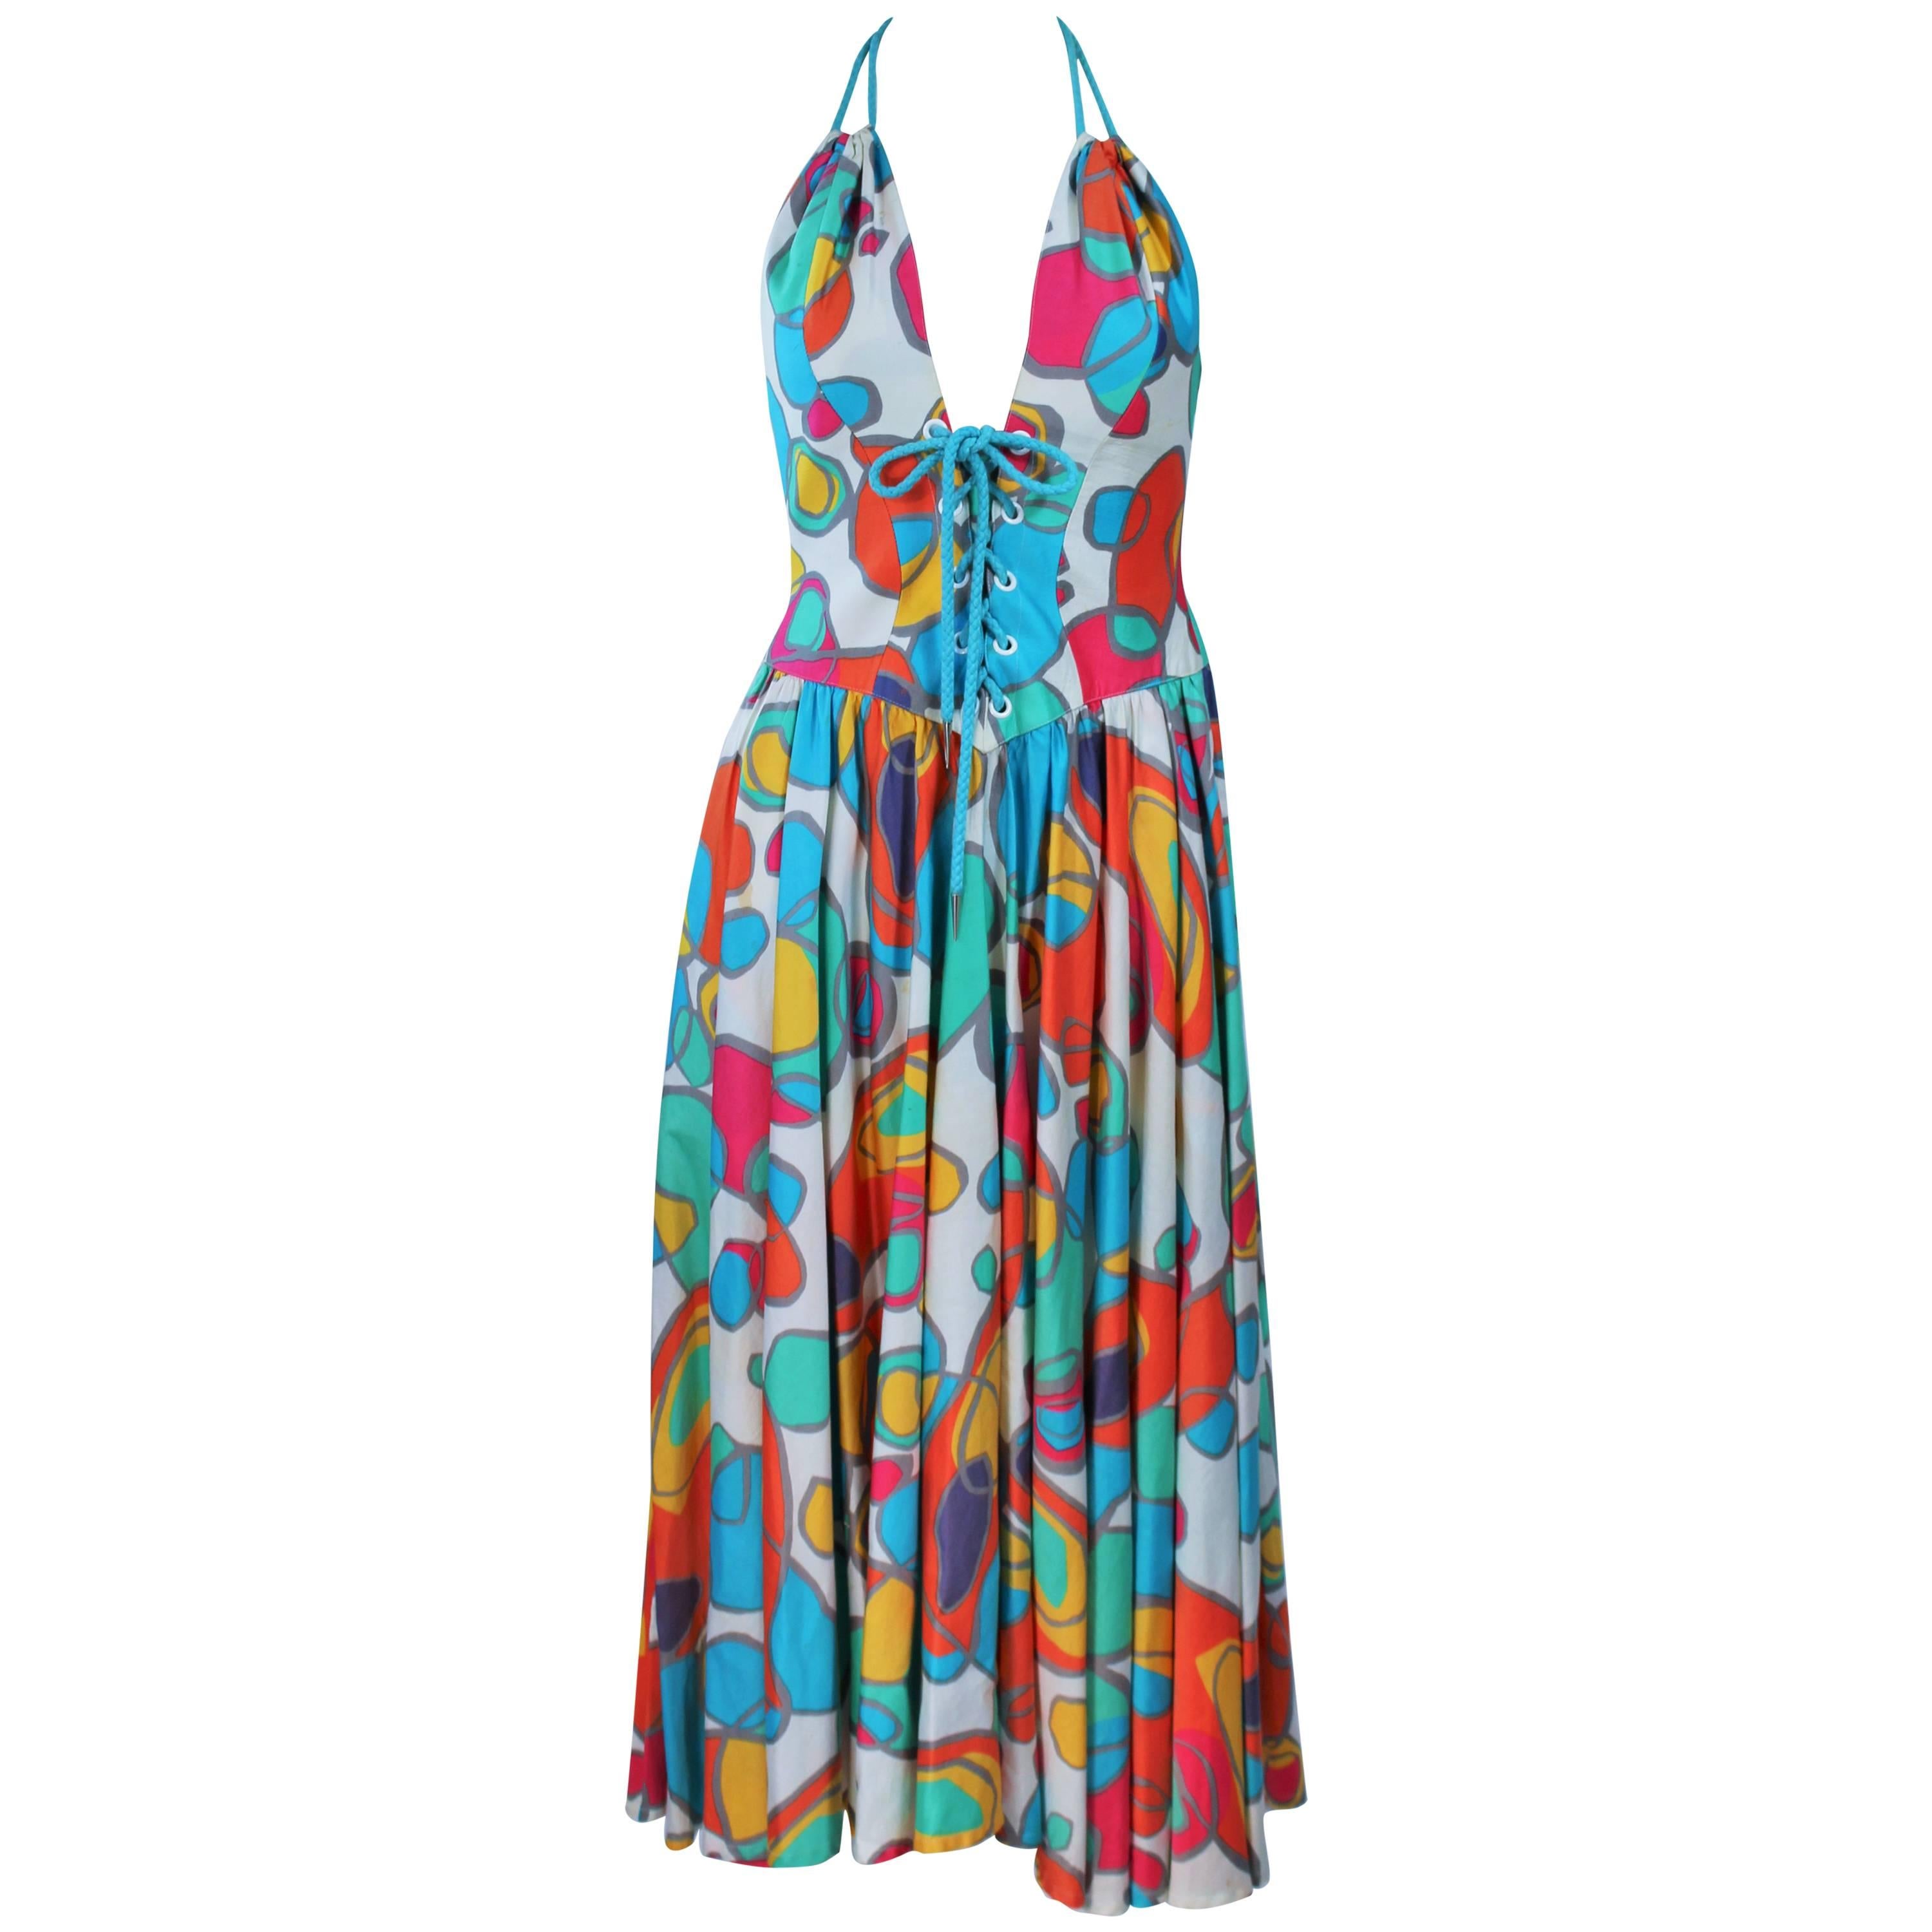 THIERRY MUGLER Printed Halter Dress Size 32 For Sale